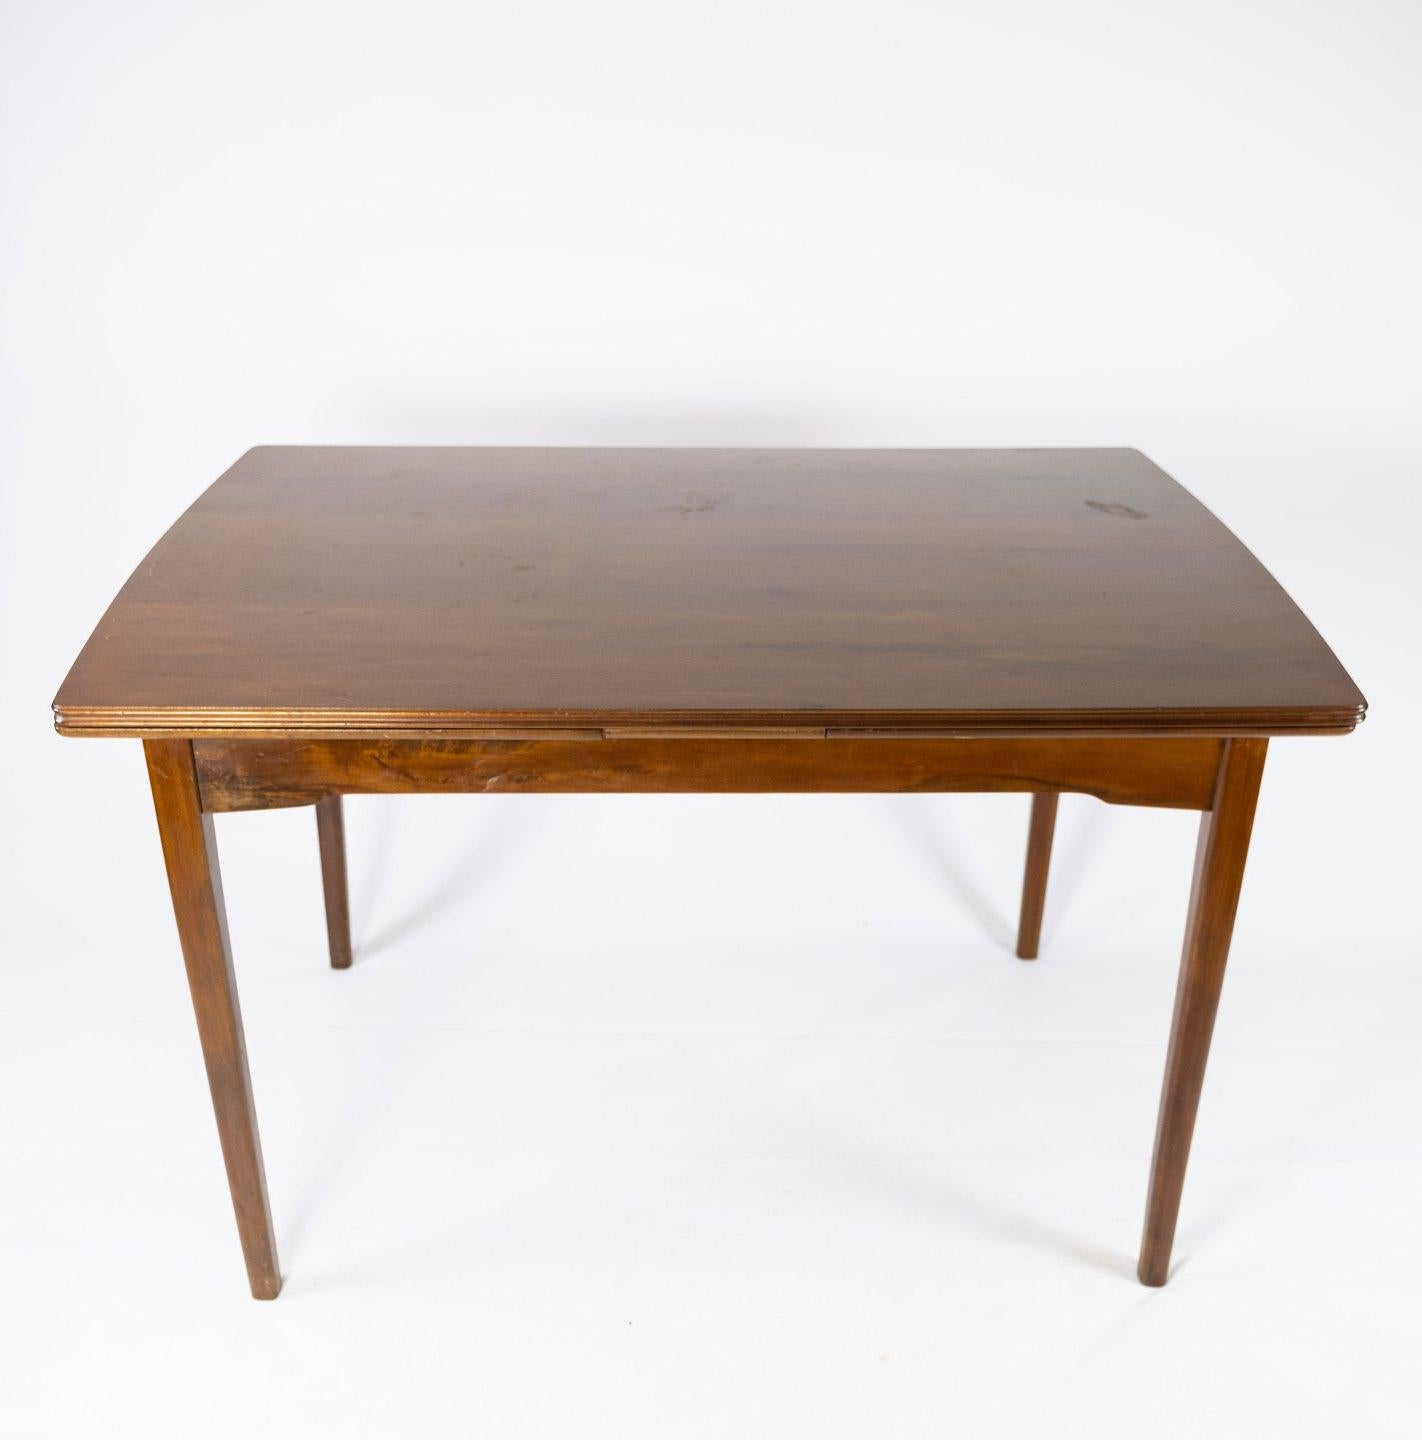 Mid-20th Century Dining Table Made In Walnut With Extension, Danish Design From 1960s For Sale